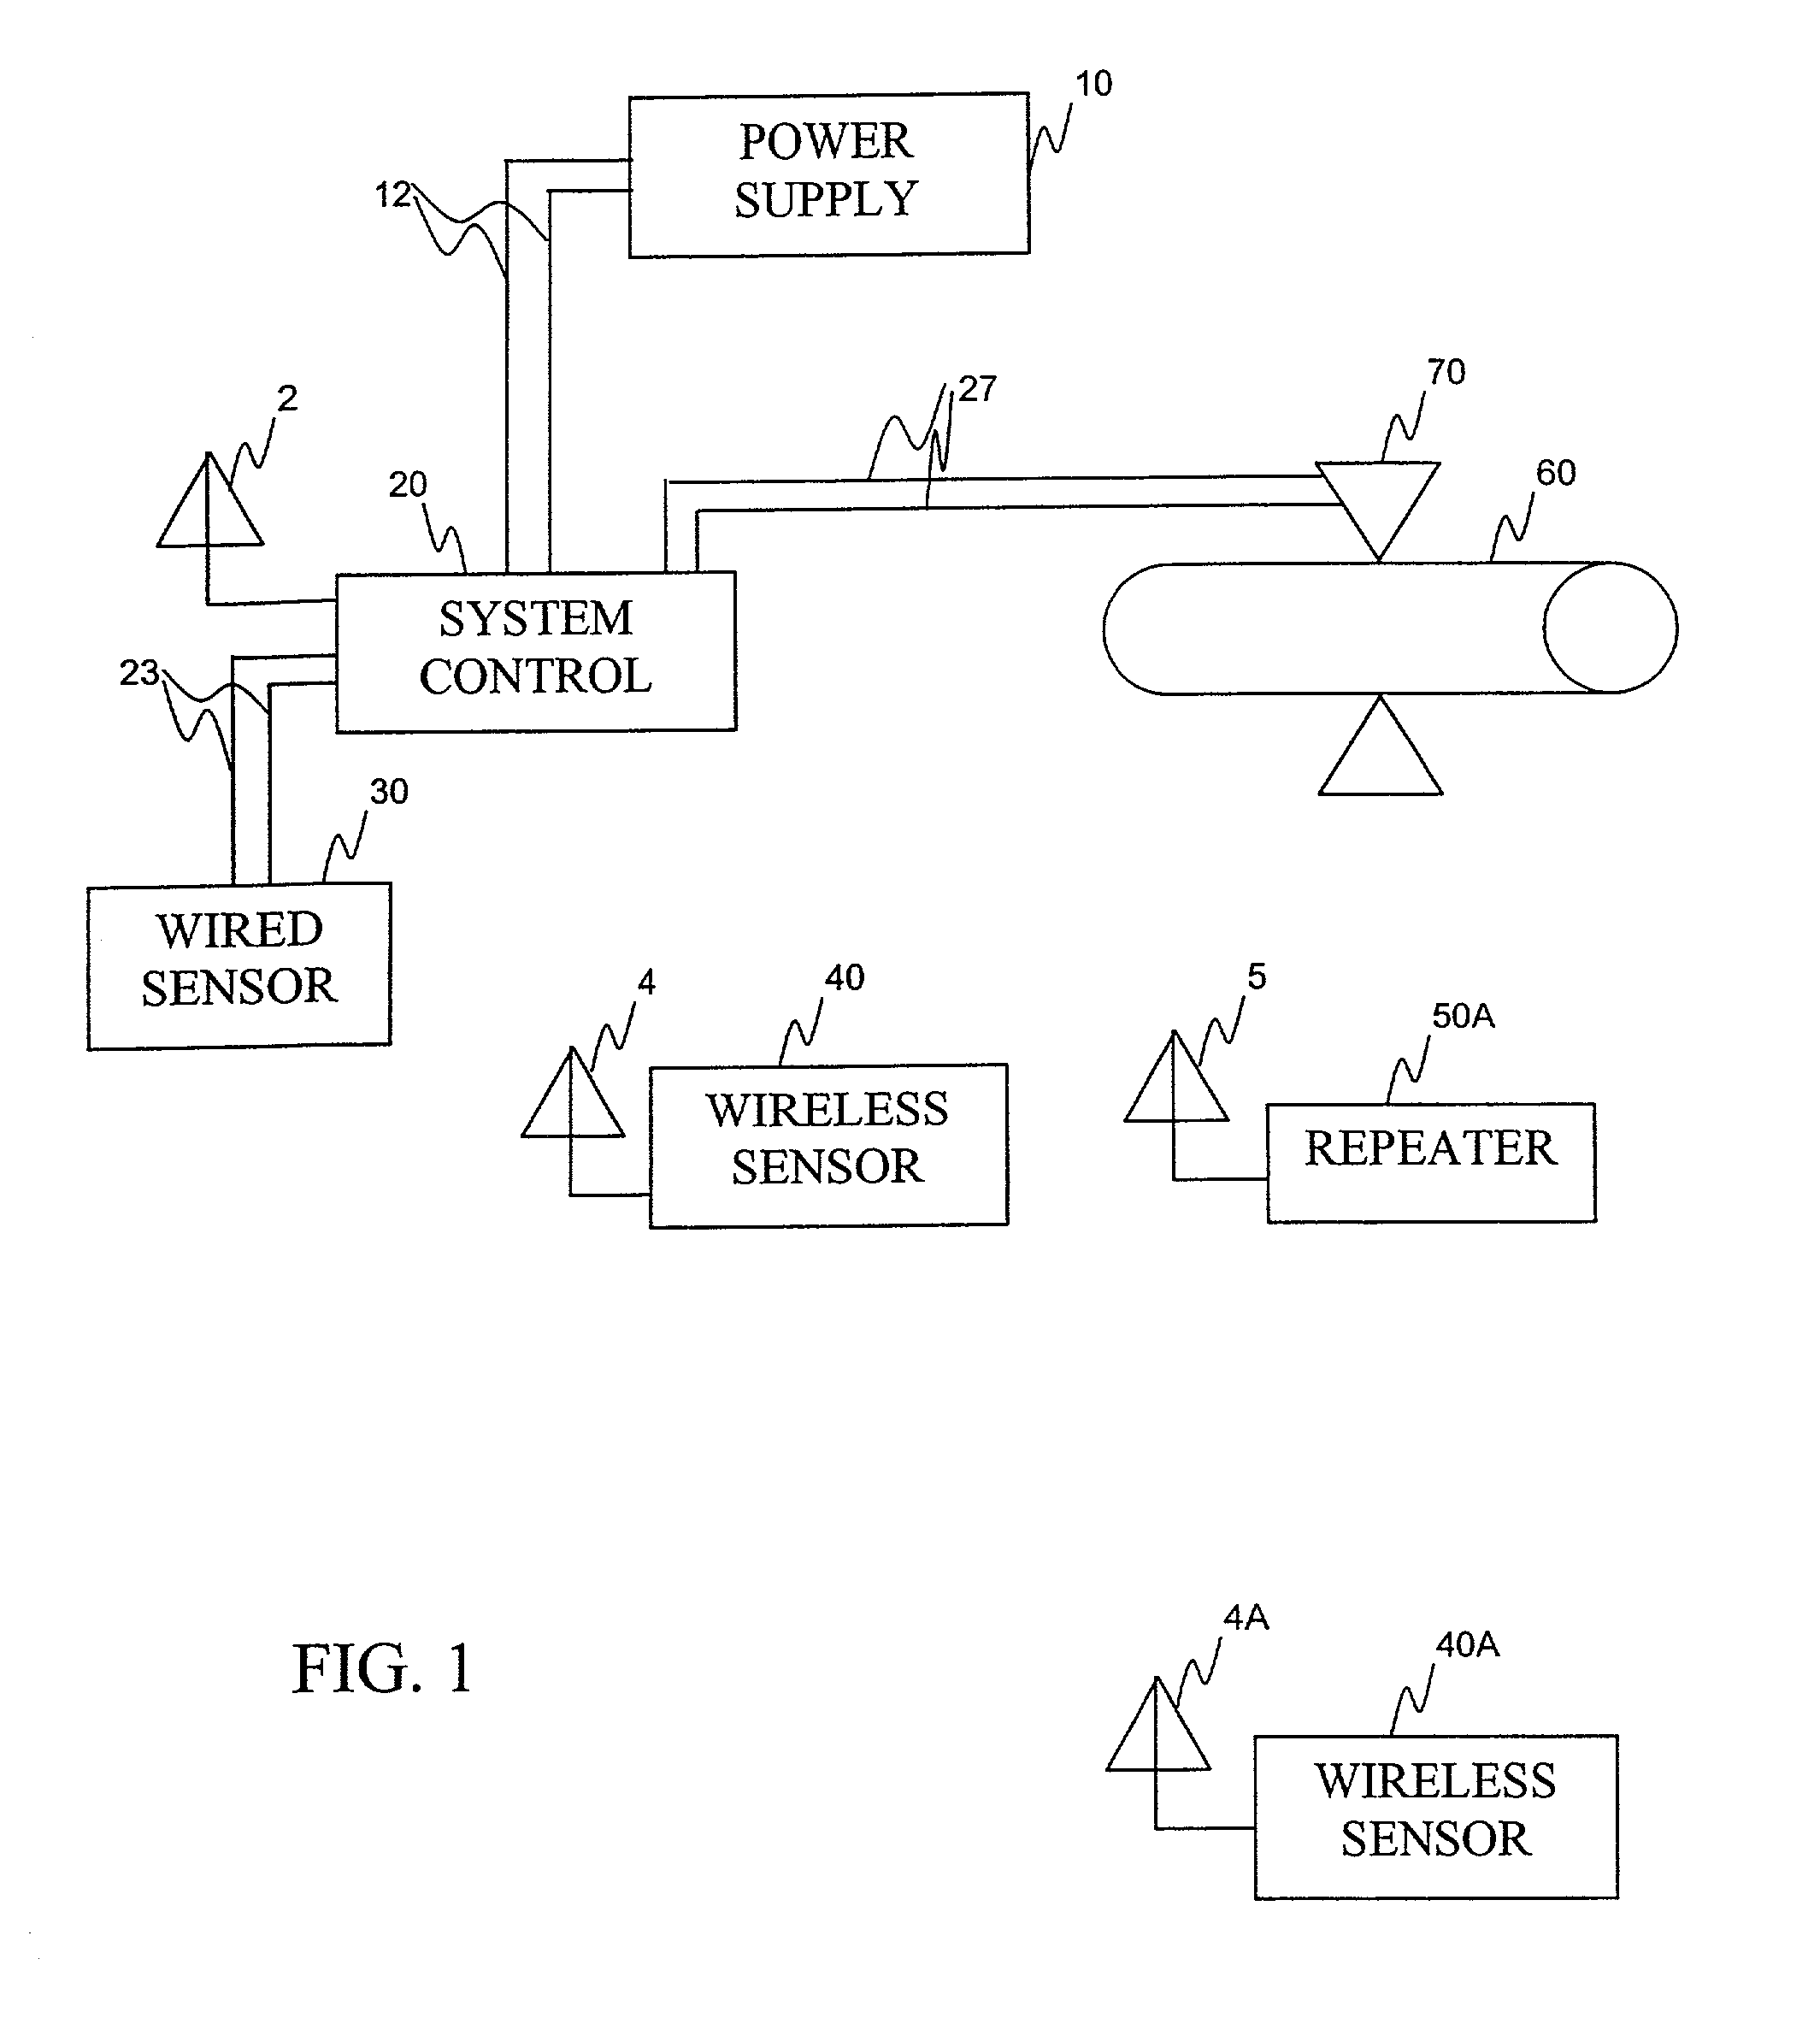 Water leak detection and suppression